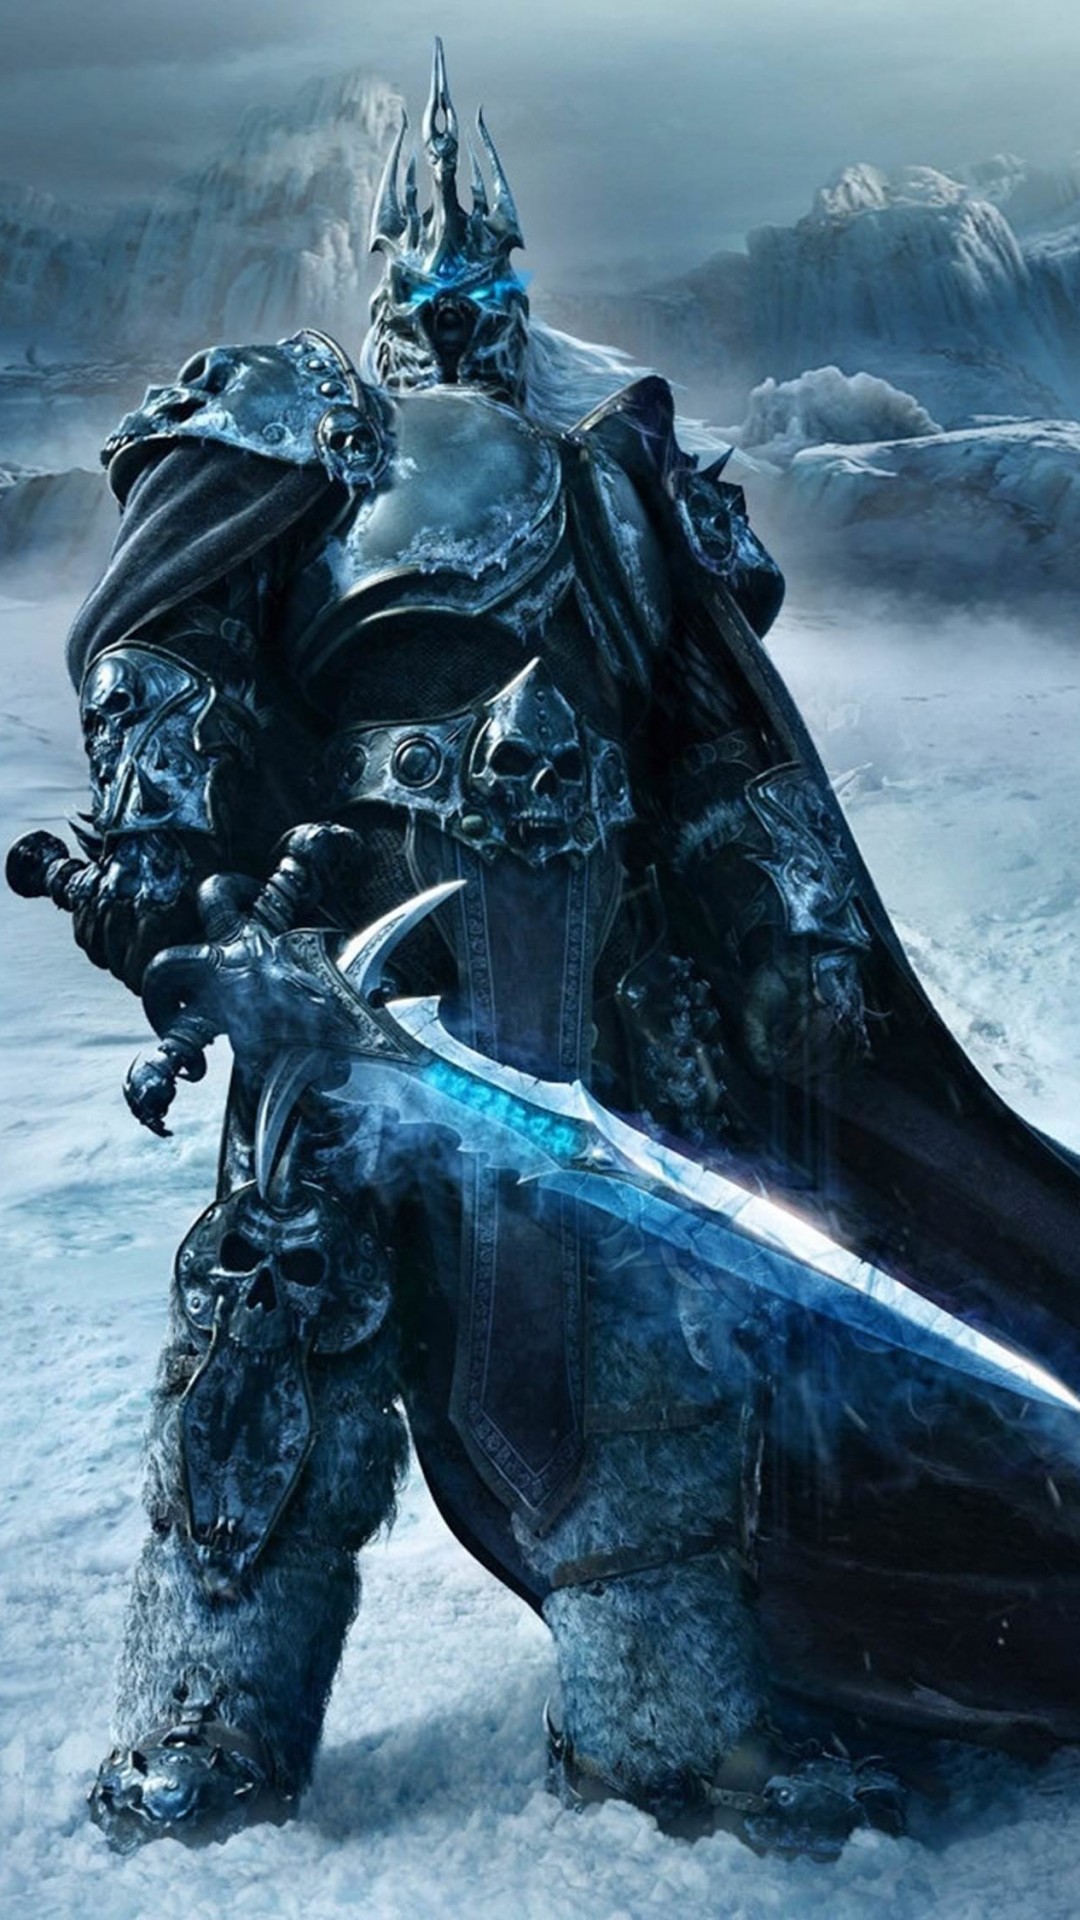 World of Warcraft: Wrath of the Lich King Wallpaper for Google Nexus 5X